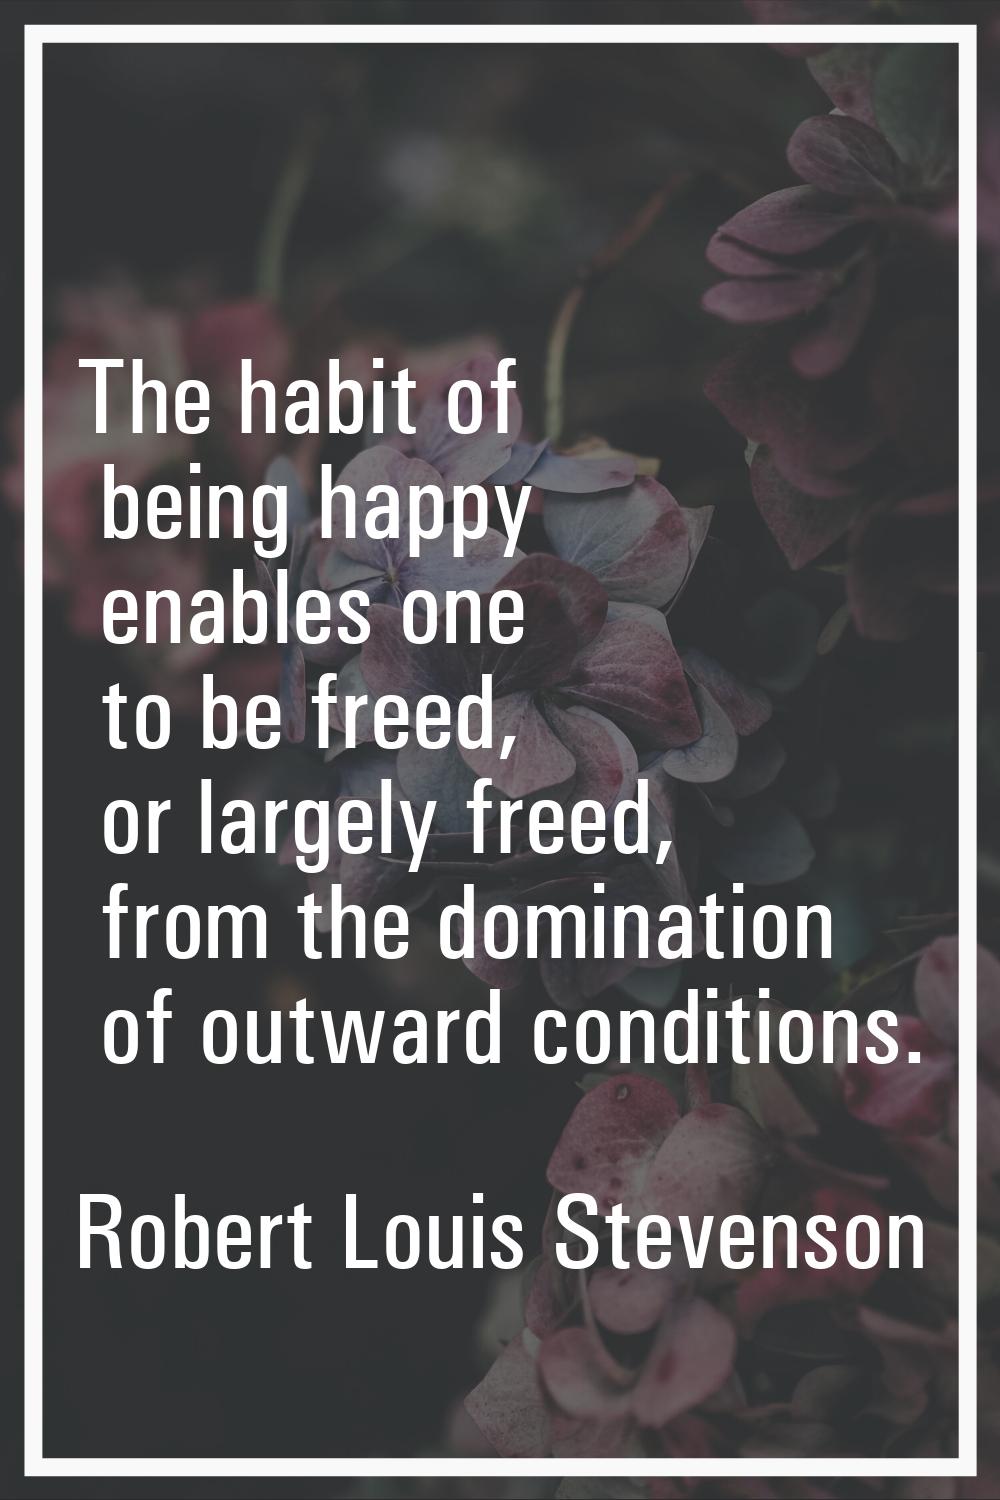 The habit of being happy enables one to be freed, or largely freed, from the domination of outward 